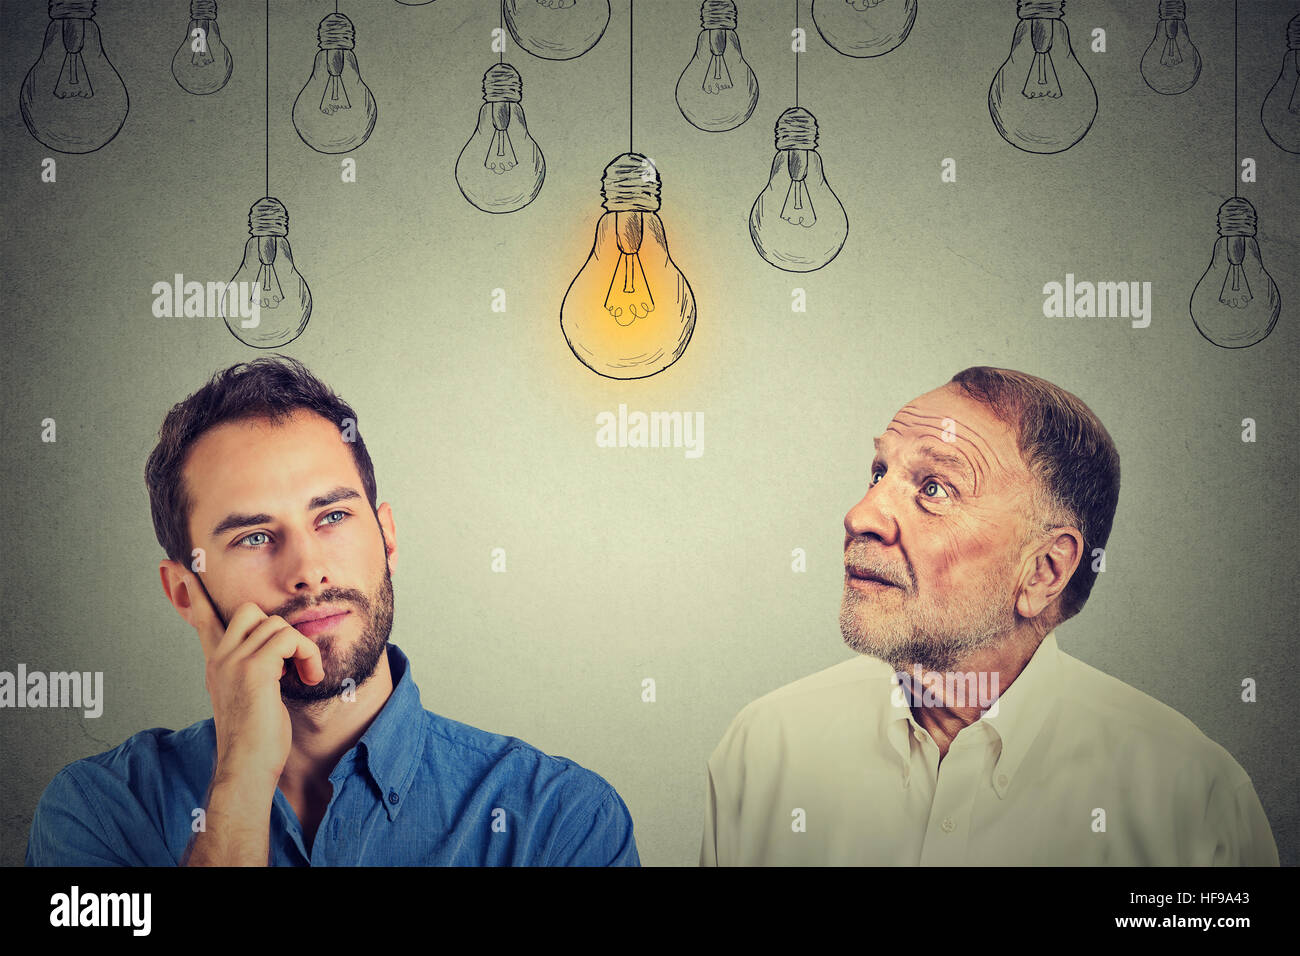 Cognitive skills concept, old man vs young person. Senior man and young guy looking at bright light bulb isolated on gray wall background Stock Photo